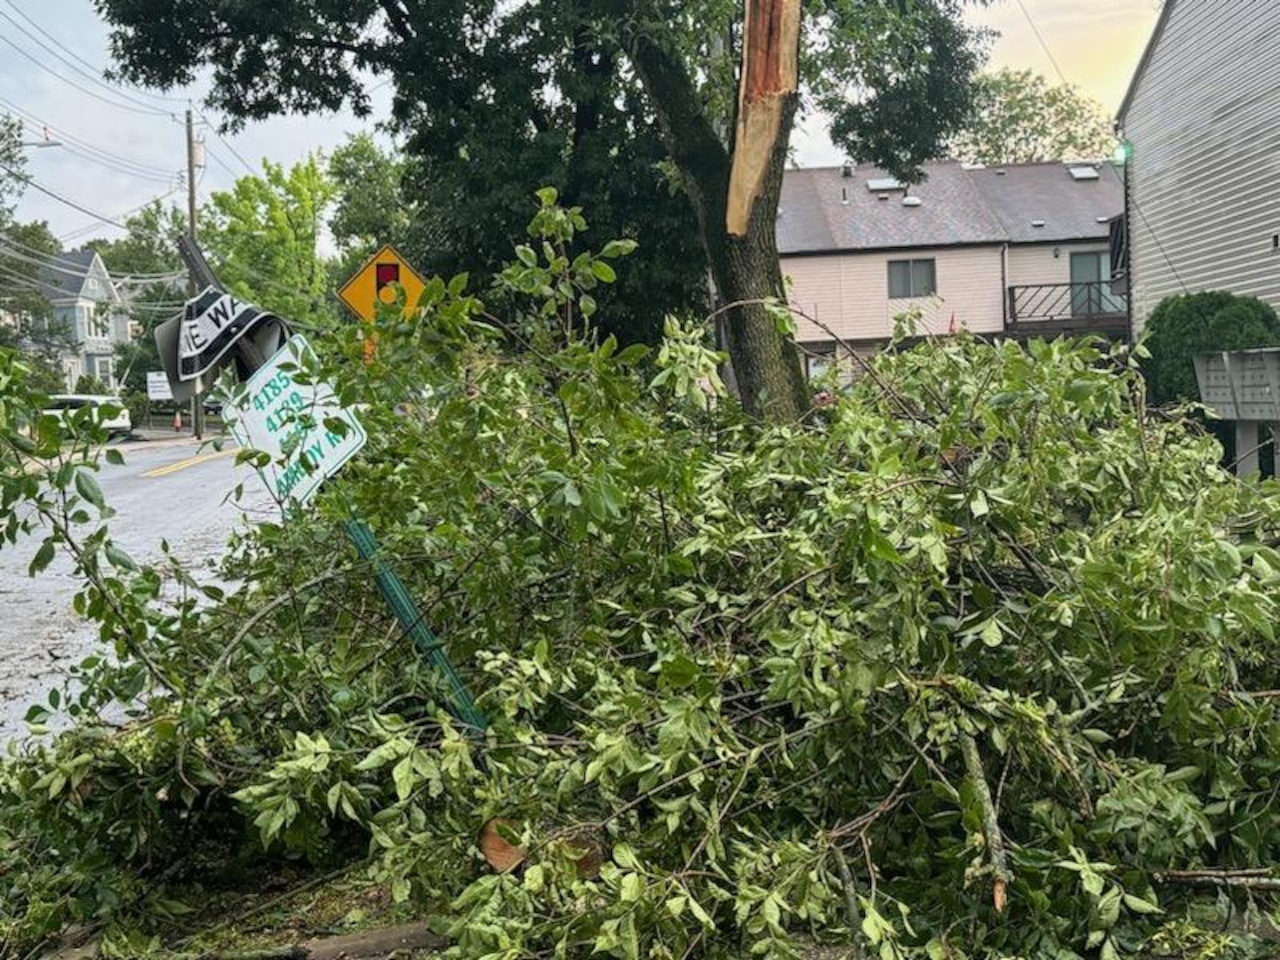 NYC storms fierce winds topple trees, cause power outages on Staten Island: Great Kills hit hard [Video]